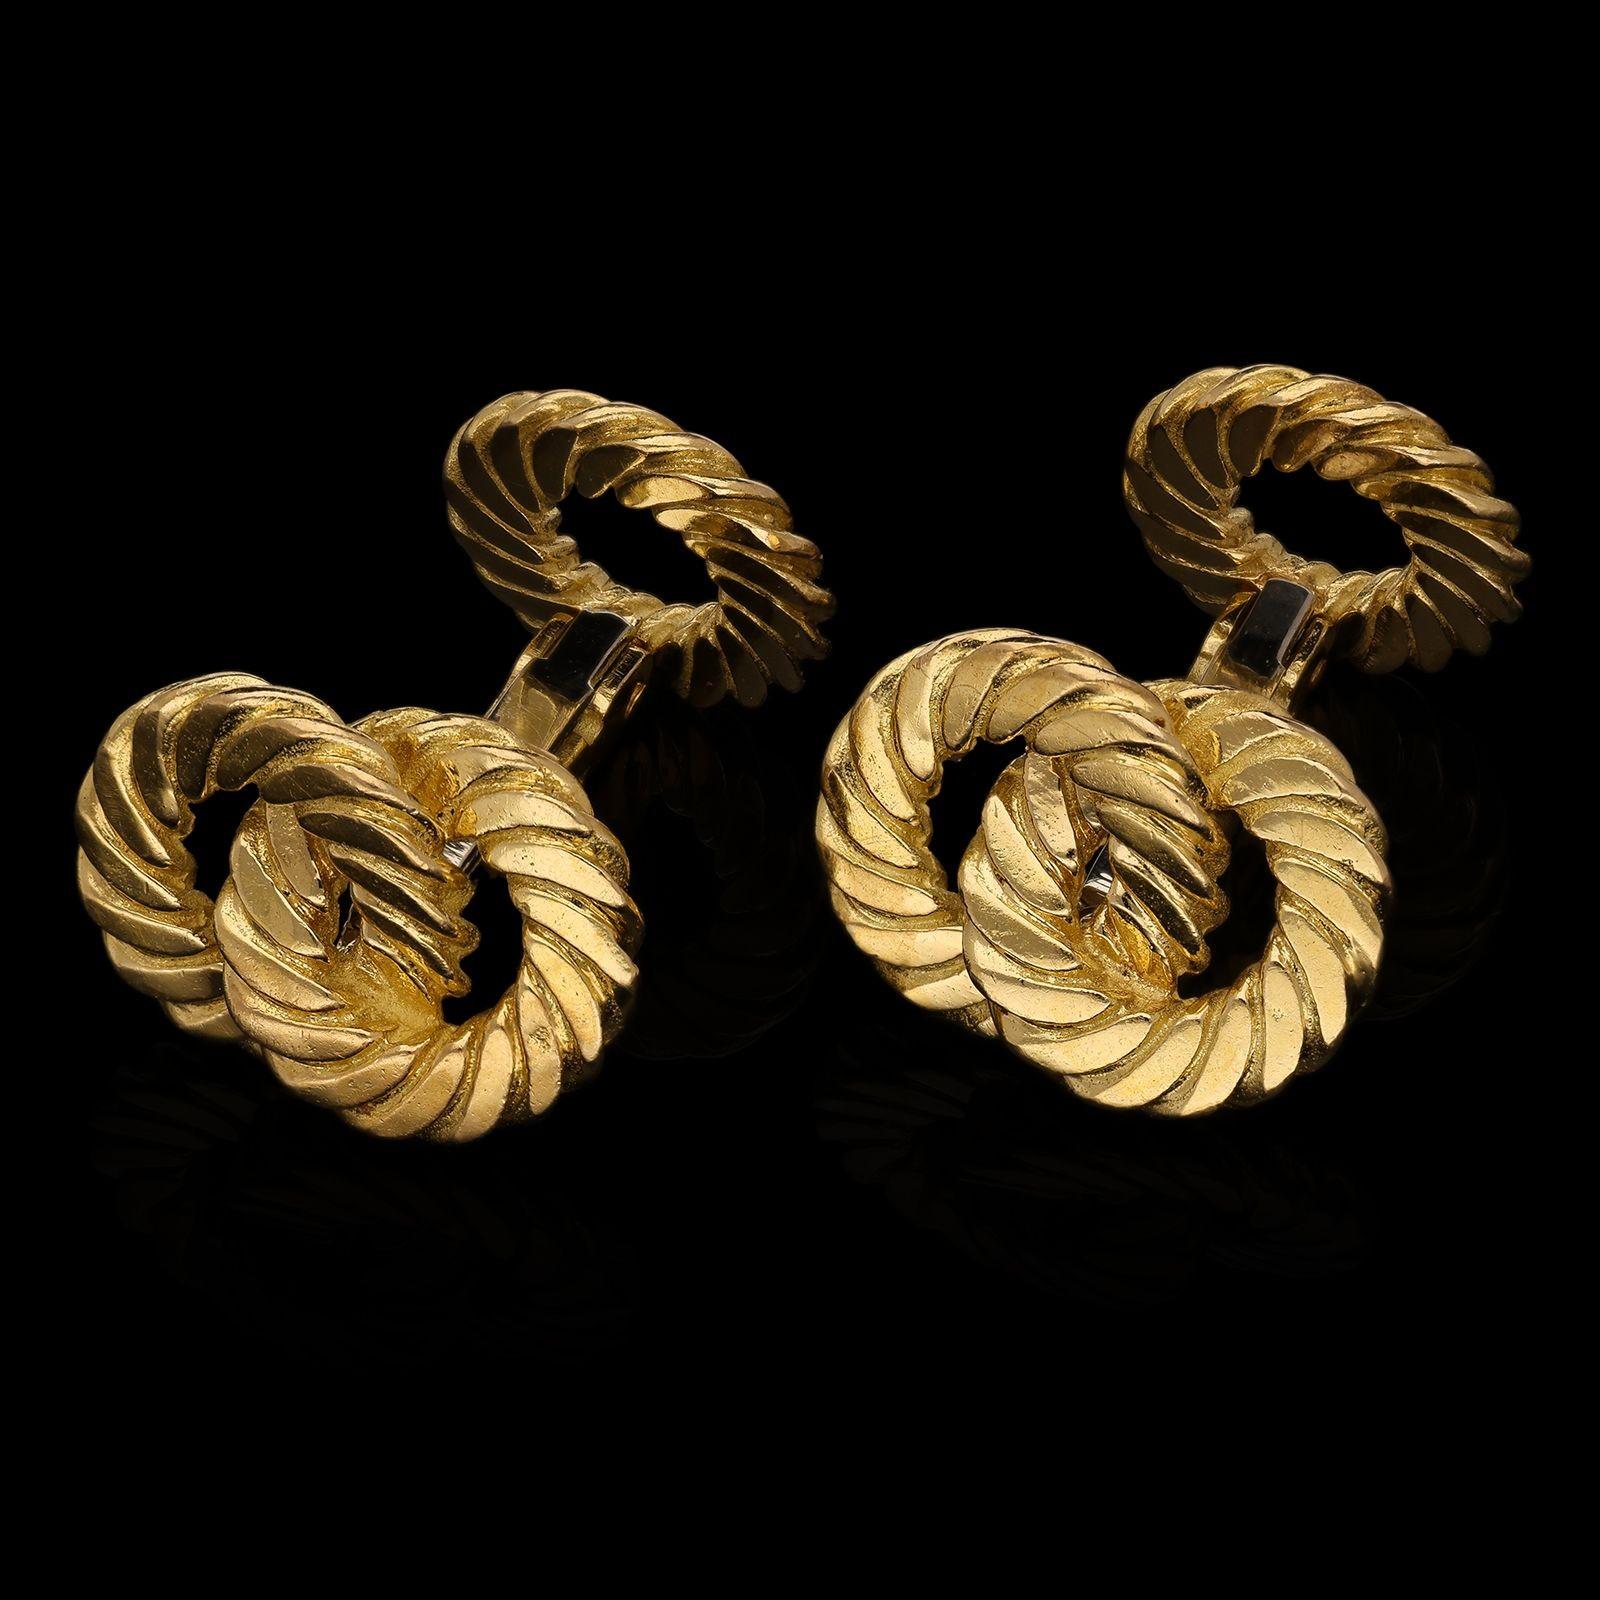 A pair of 18ct gold double ended cufflinks by Van Cleef & Arpels c.1970s, the cufflinks with a square section solid bar link terminated at one end by a single open circle formed of rope twist gold, the other with two similar circles entwined to form